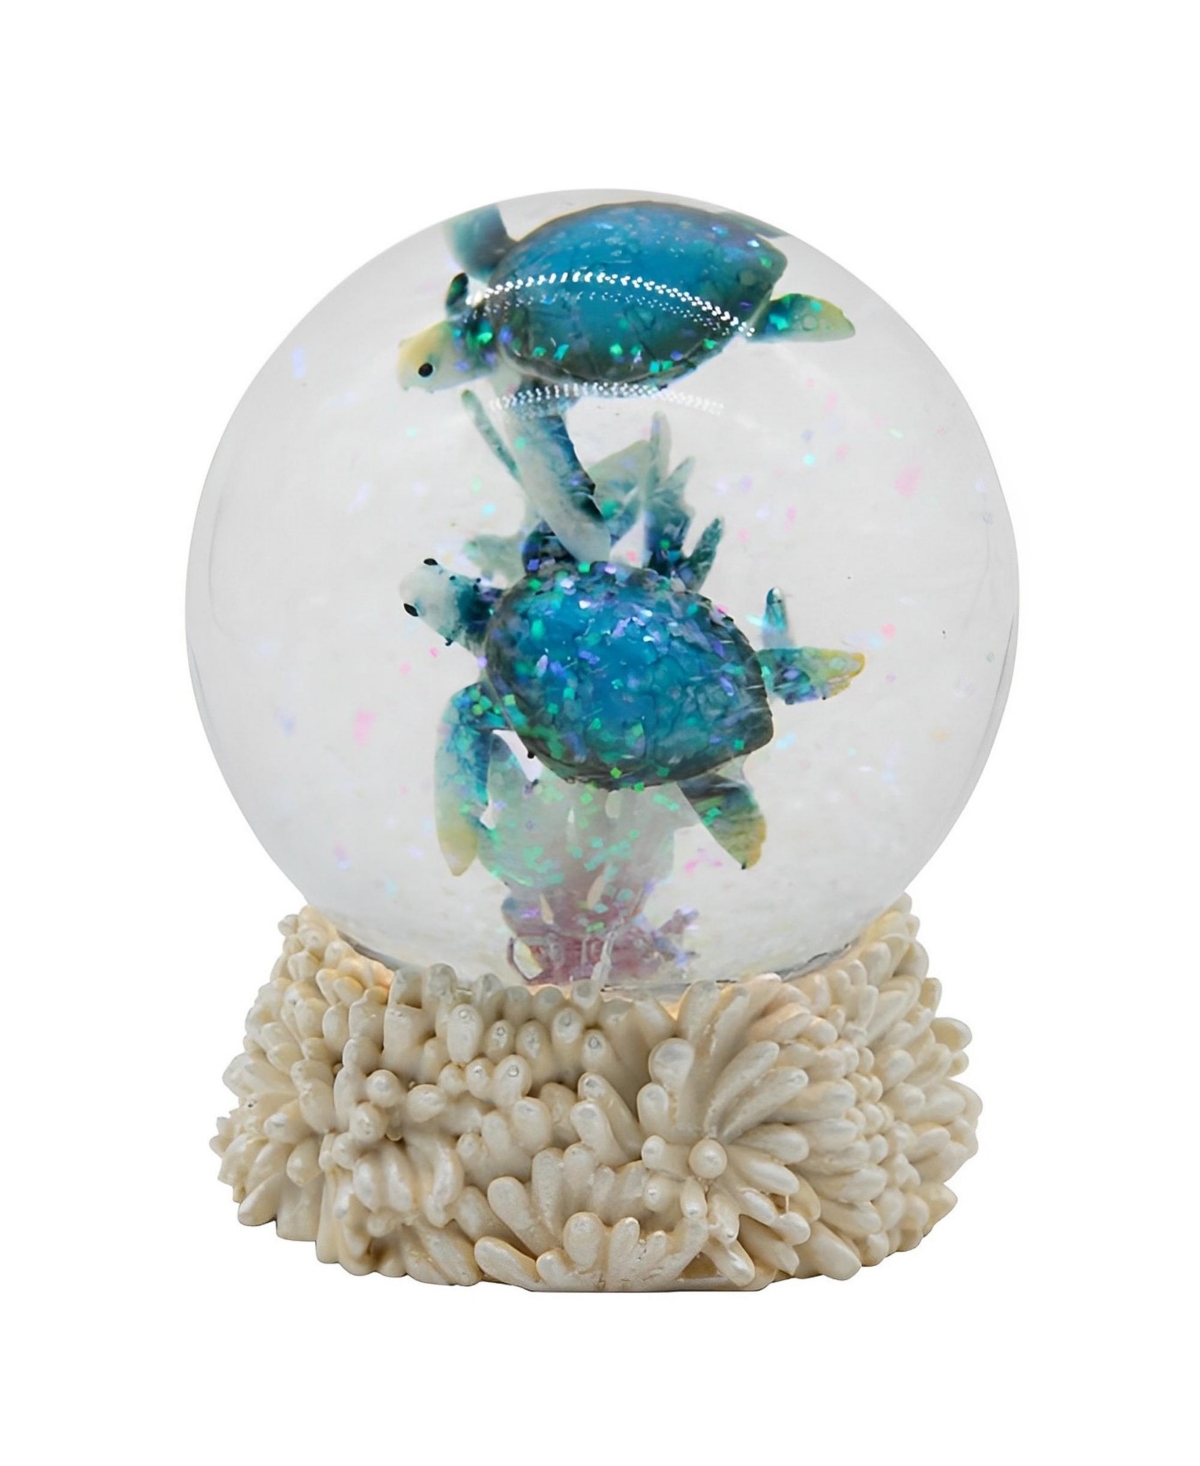 4"H Blue Sea Turtle Glitter Snow Globe Animal Figurine Home Decor Perfect Gift for House Warming, Holidays and Birthdays - Multicolor